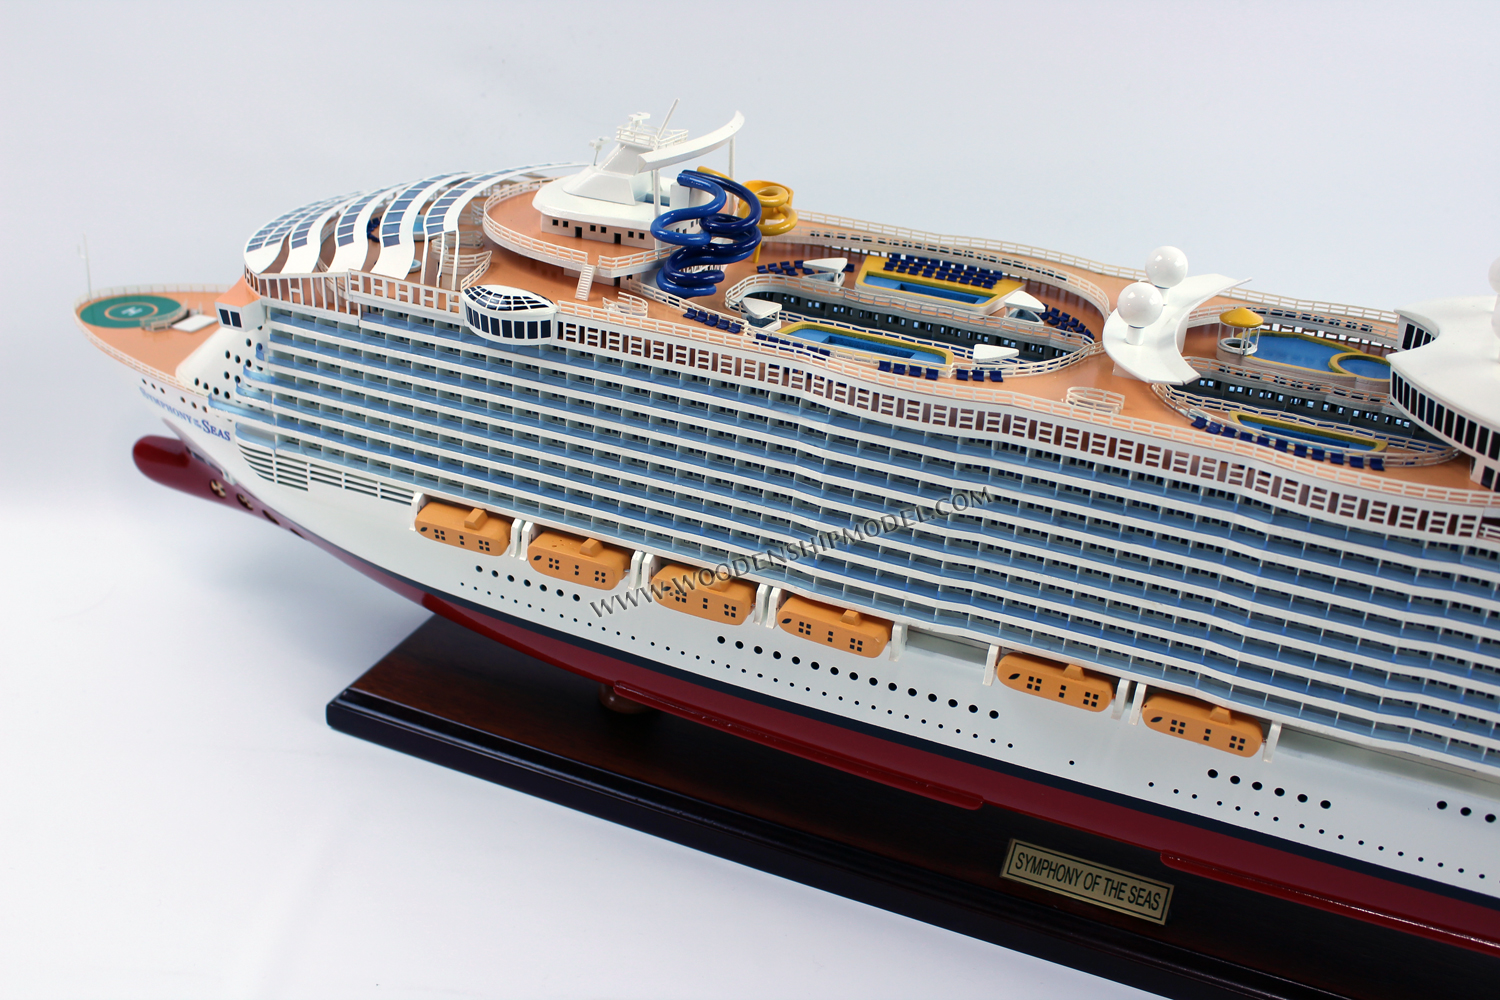 Symphony of the Seas Model Ship Stern View, scale Symphony of the Seas model ship, ship model Symphony of the Seas, wooden ship model Symphony of the Seas, hand-made ship model Symphony of the Seas with lights, display ship model Symphony of the Seas, Symphony of the Seas model, woodenshipmodel, woodenmodelboat, gianhien, gia nhien co., ltd, gia nhien co model boat and ship builder